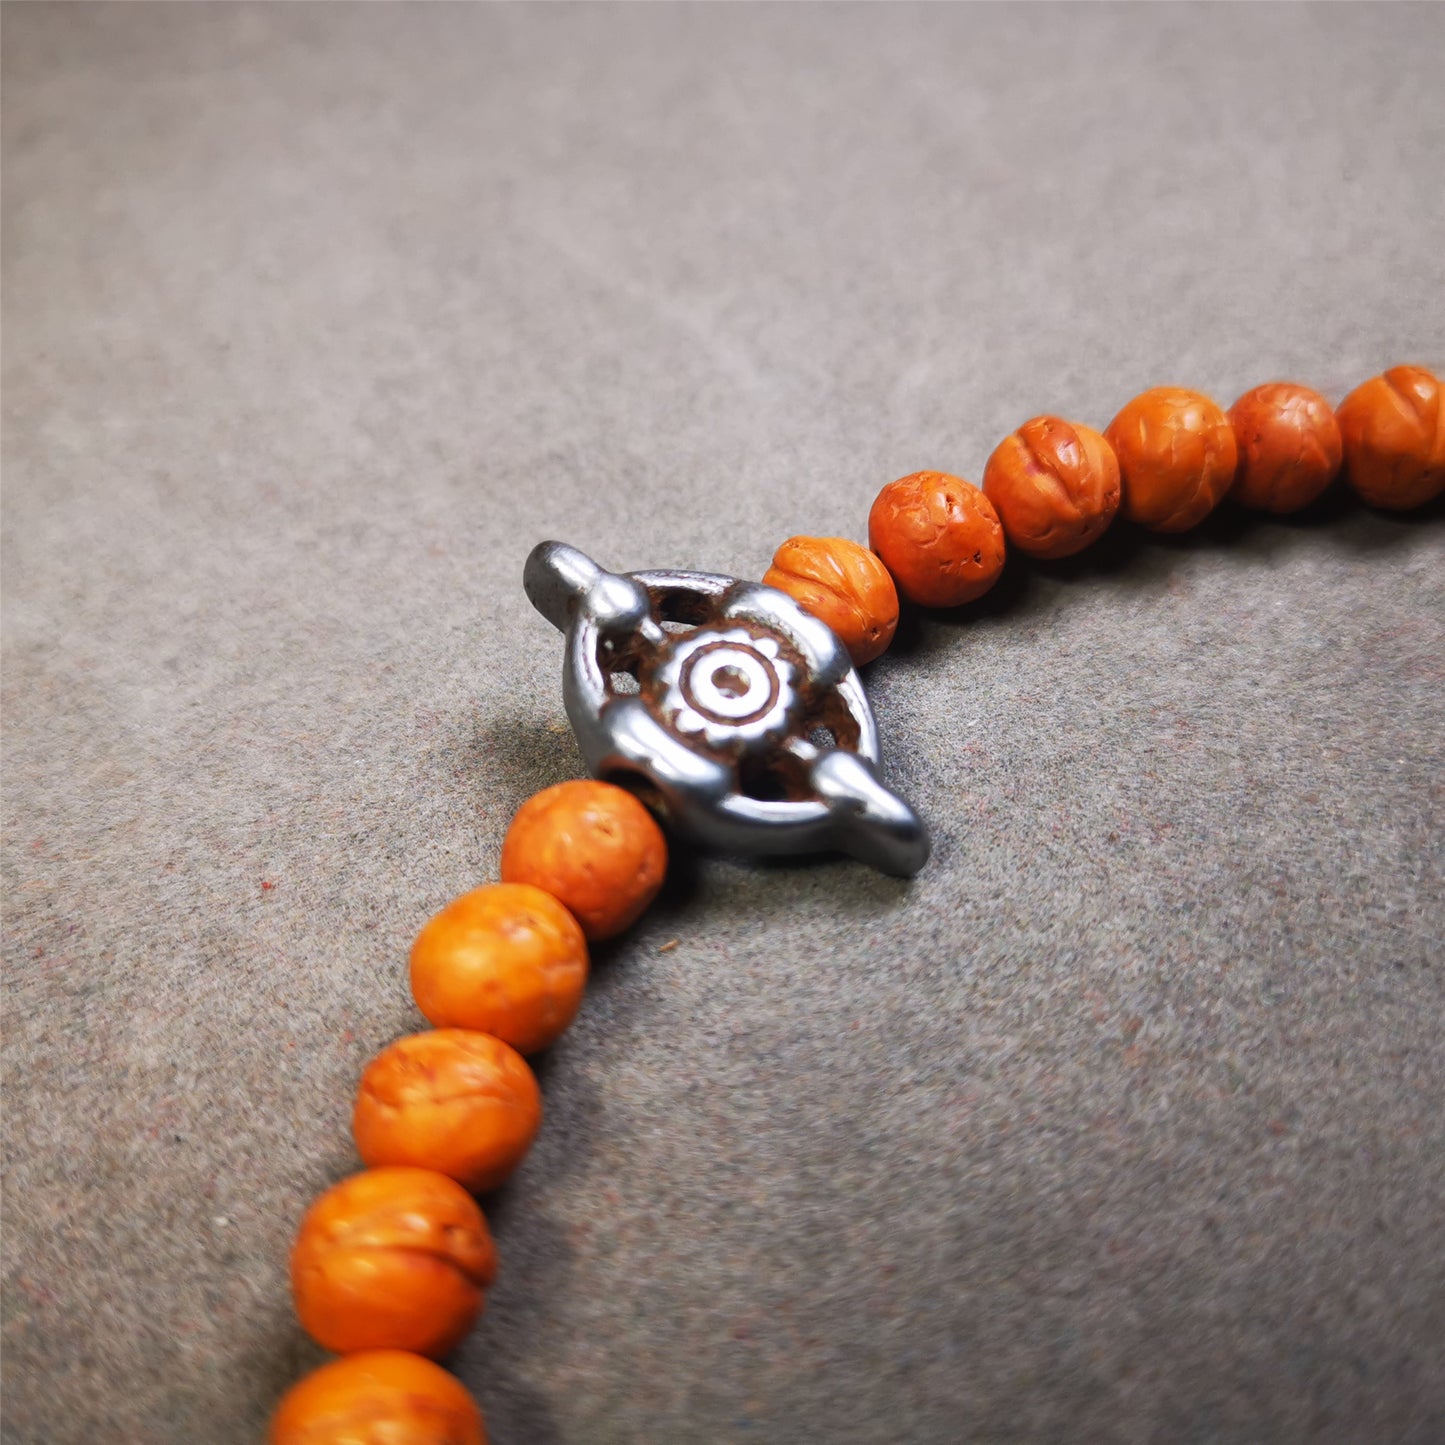 This unique cross vajra pendant was made by Tibetan craftsmen.  You can use it as a spacer bead on mala,or pendant bead under guru bead. Also can be use as amulet pendant or keychain.